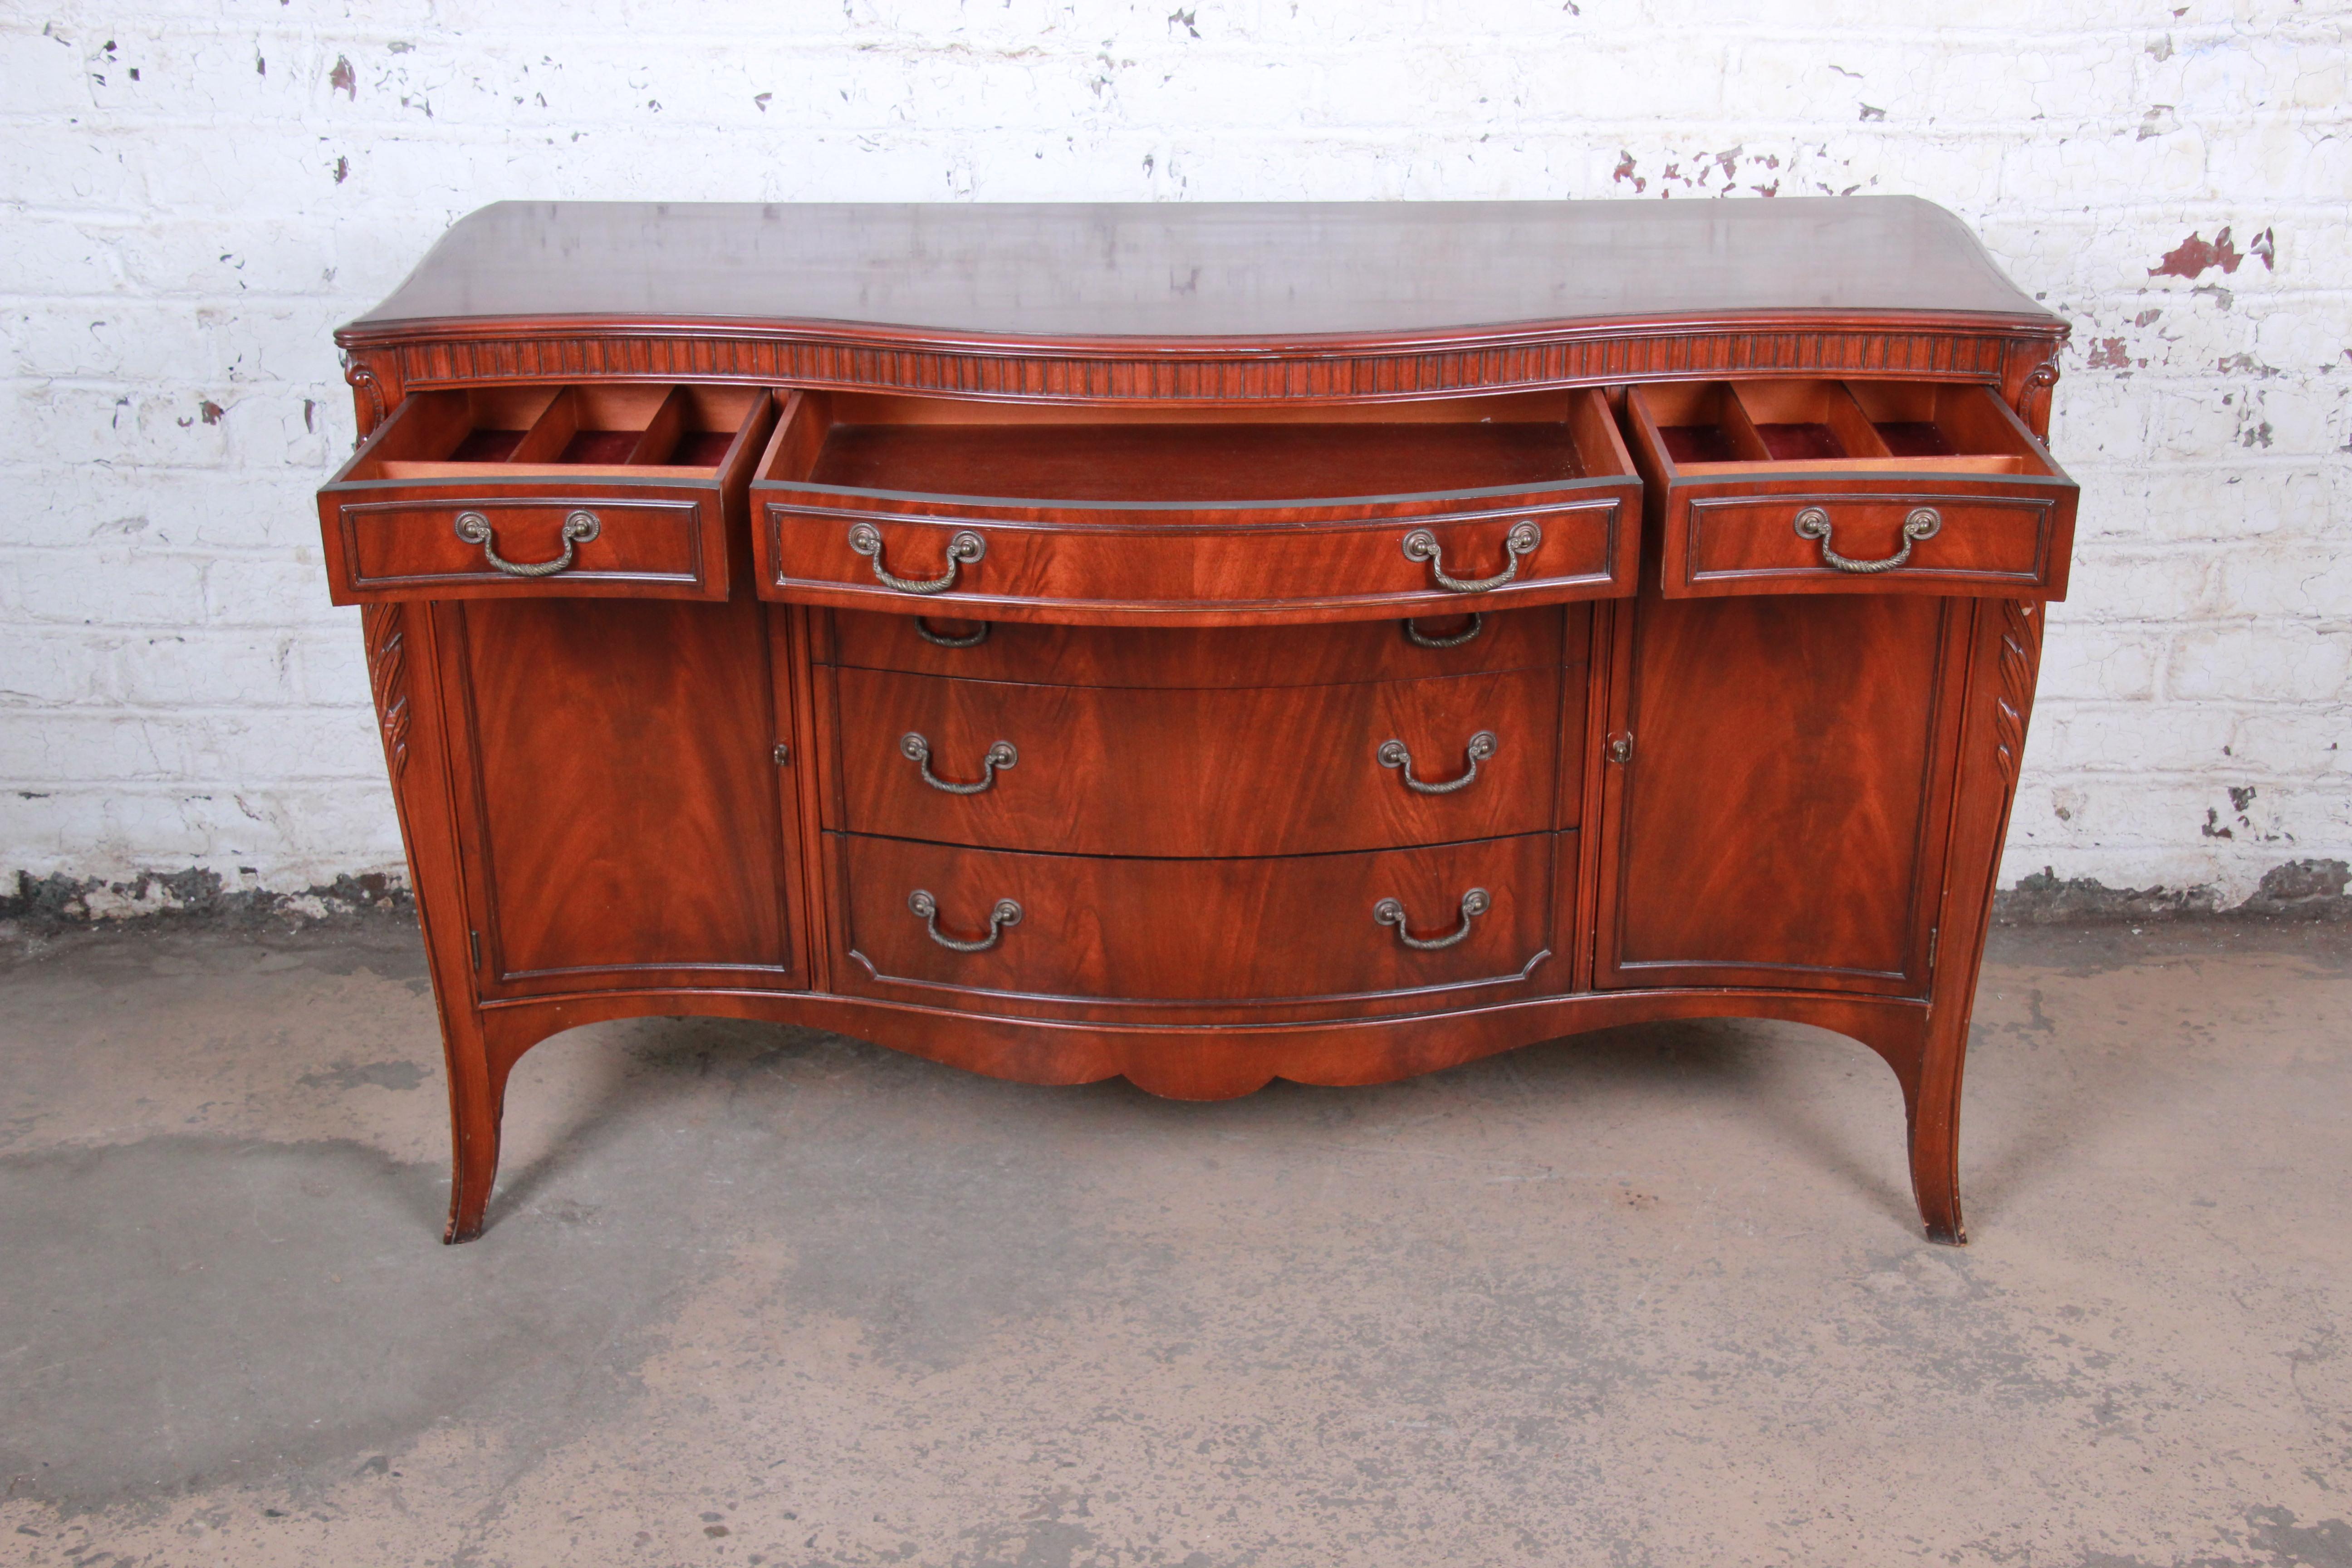 French Provincial Flame Mahogany French Carved Bow Front Sideboard Credenza by Drexel